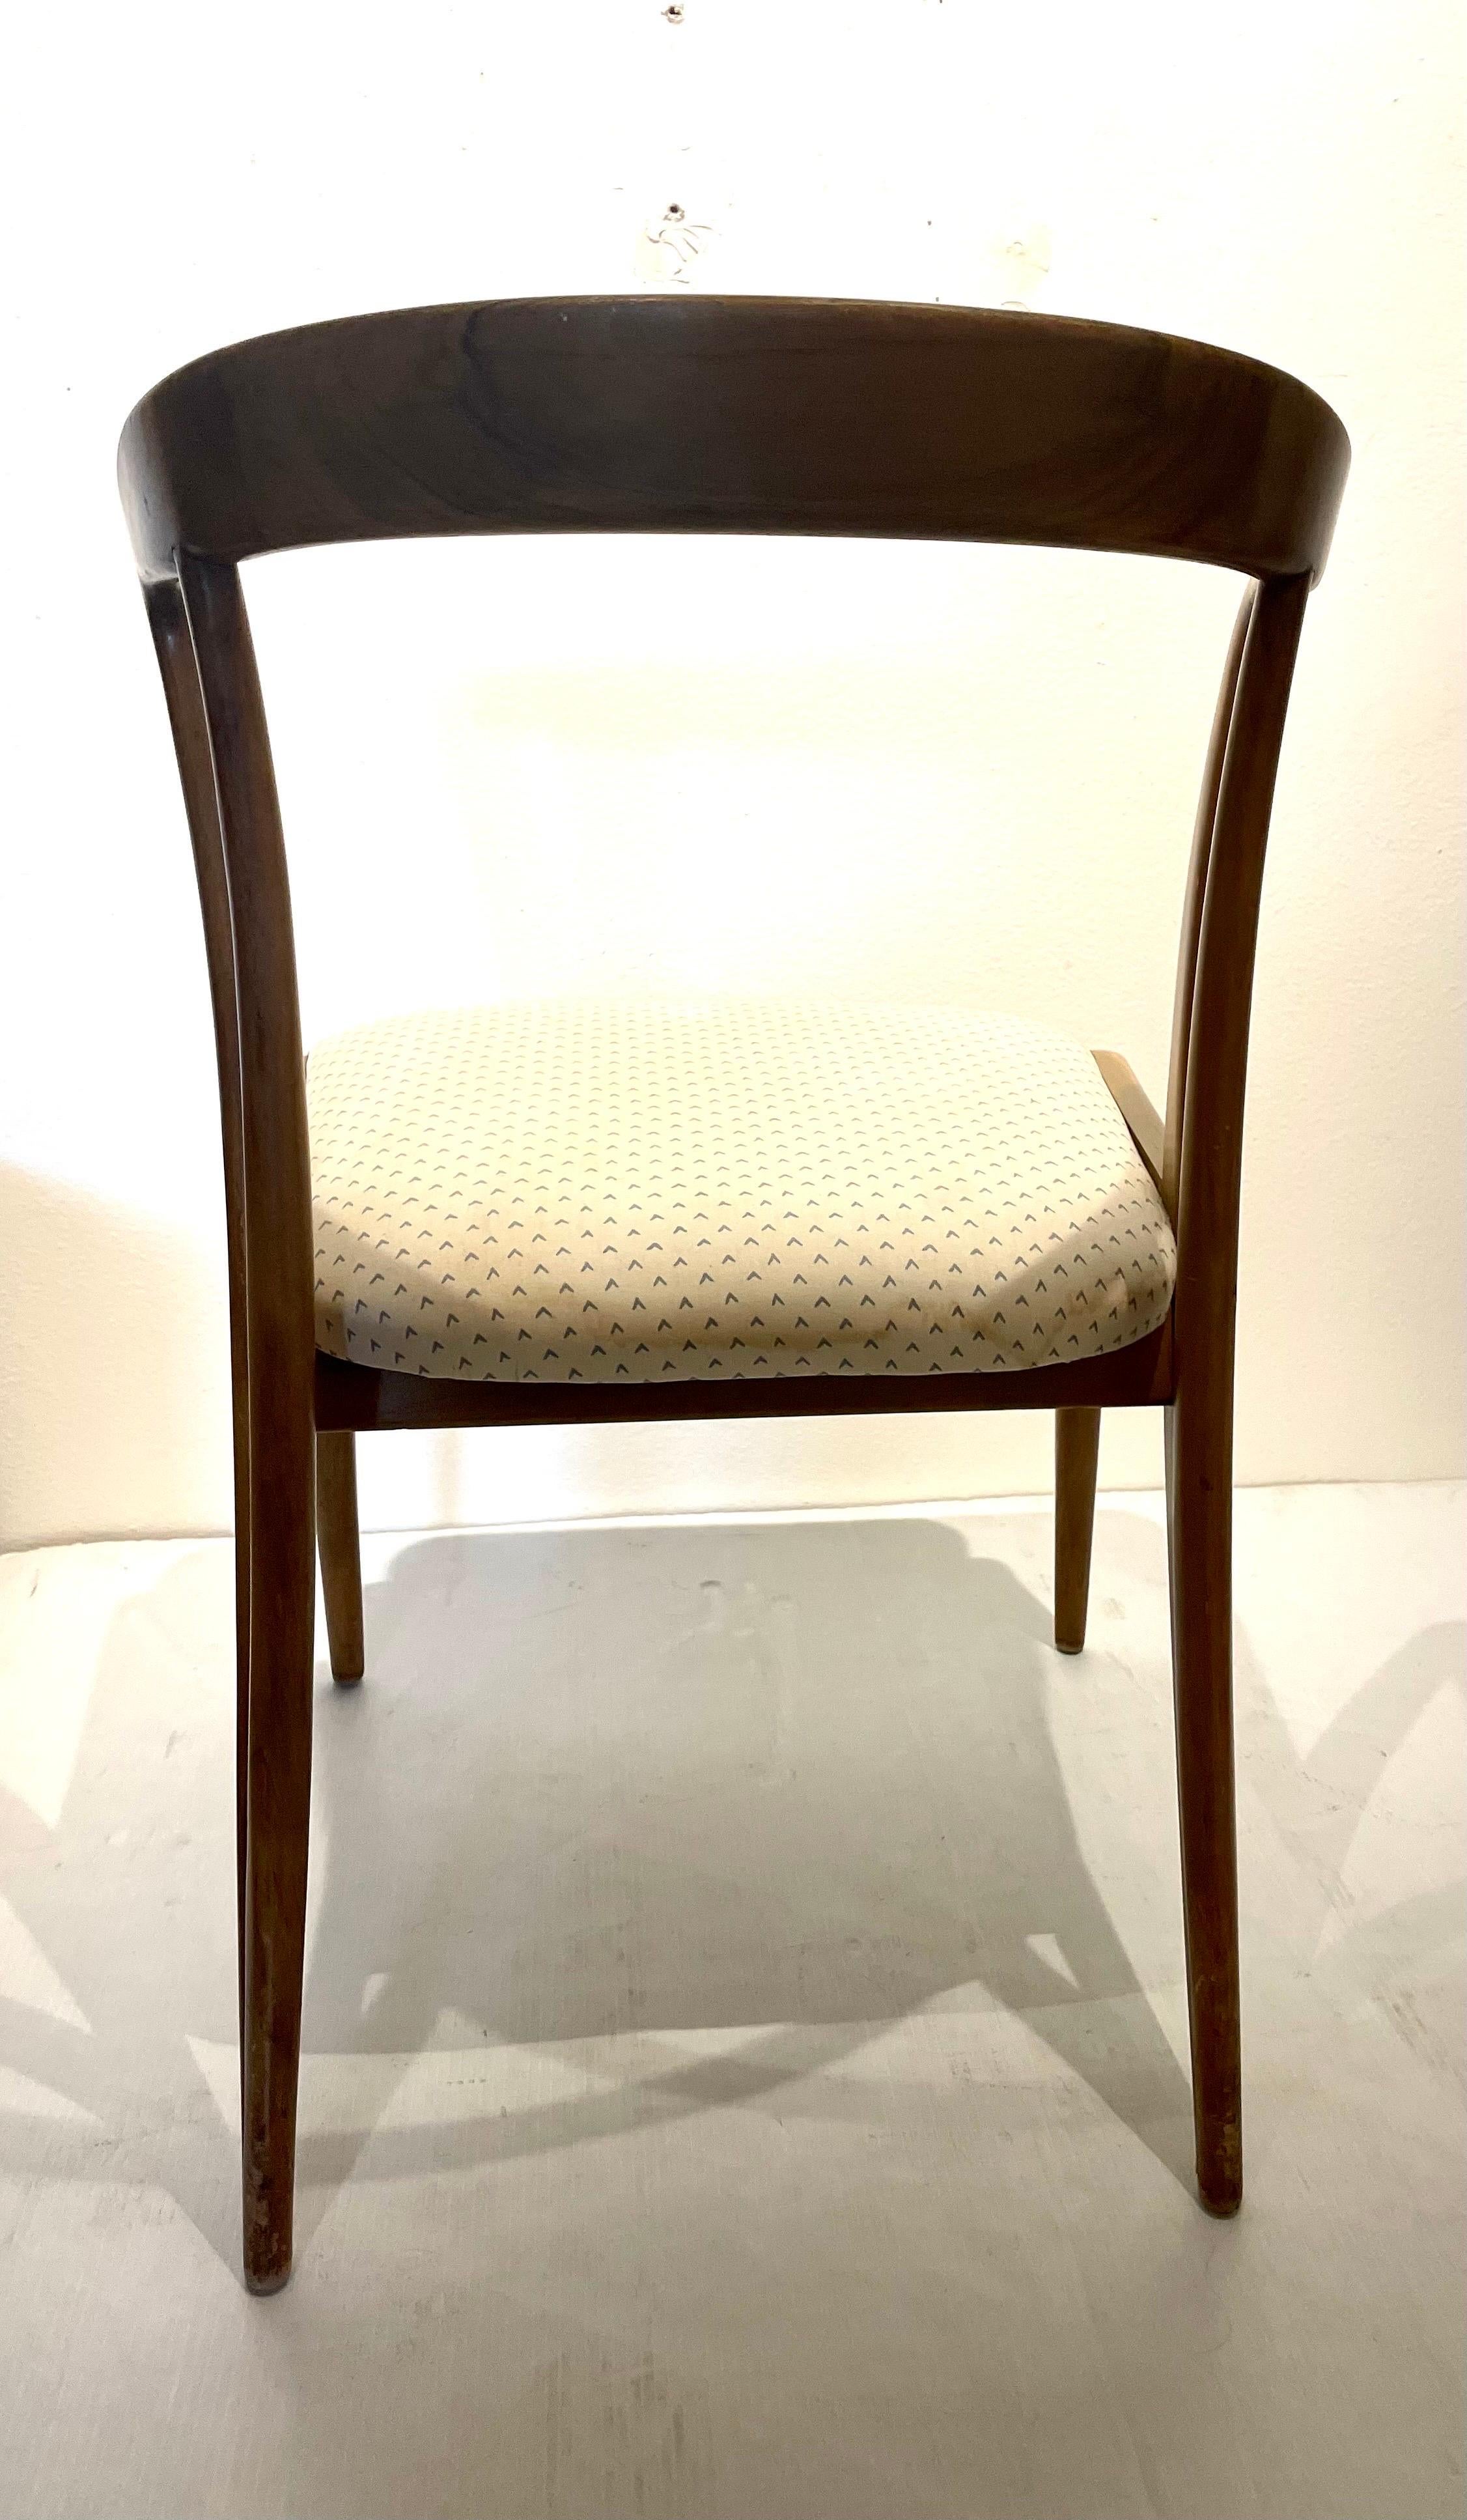 Italian Mid Century Modern Solid Walnut Rare Chair by Bertha Schaefer for Singer & Sons For Sale